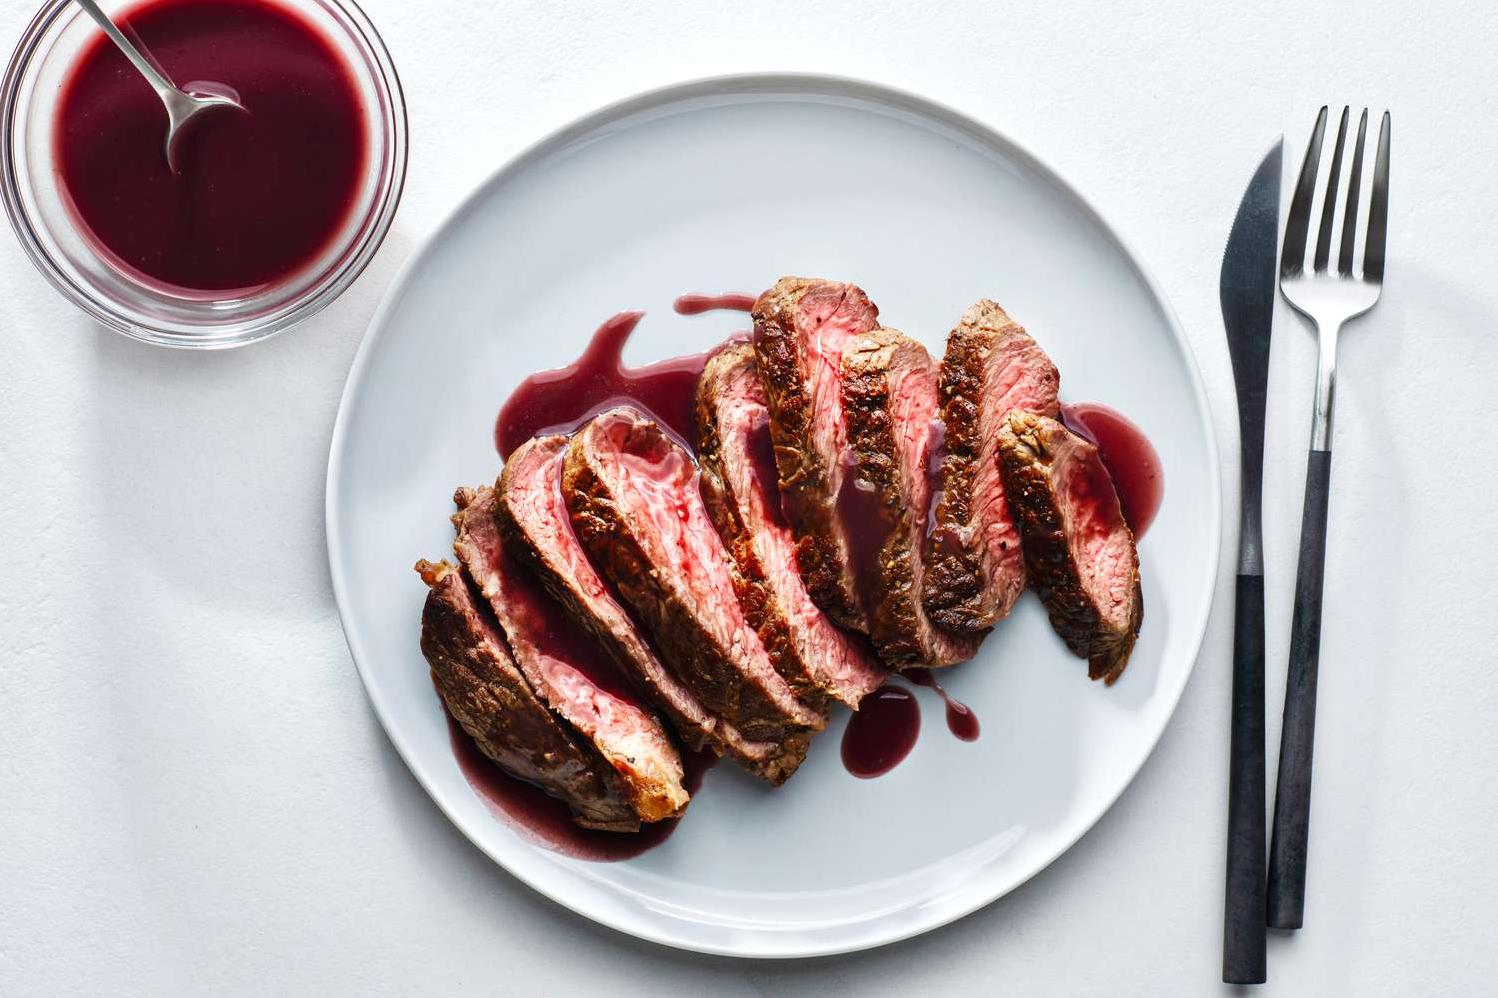  Savor the richness of this flavorful red wine sauce